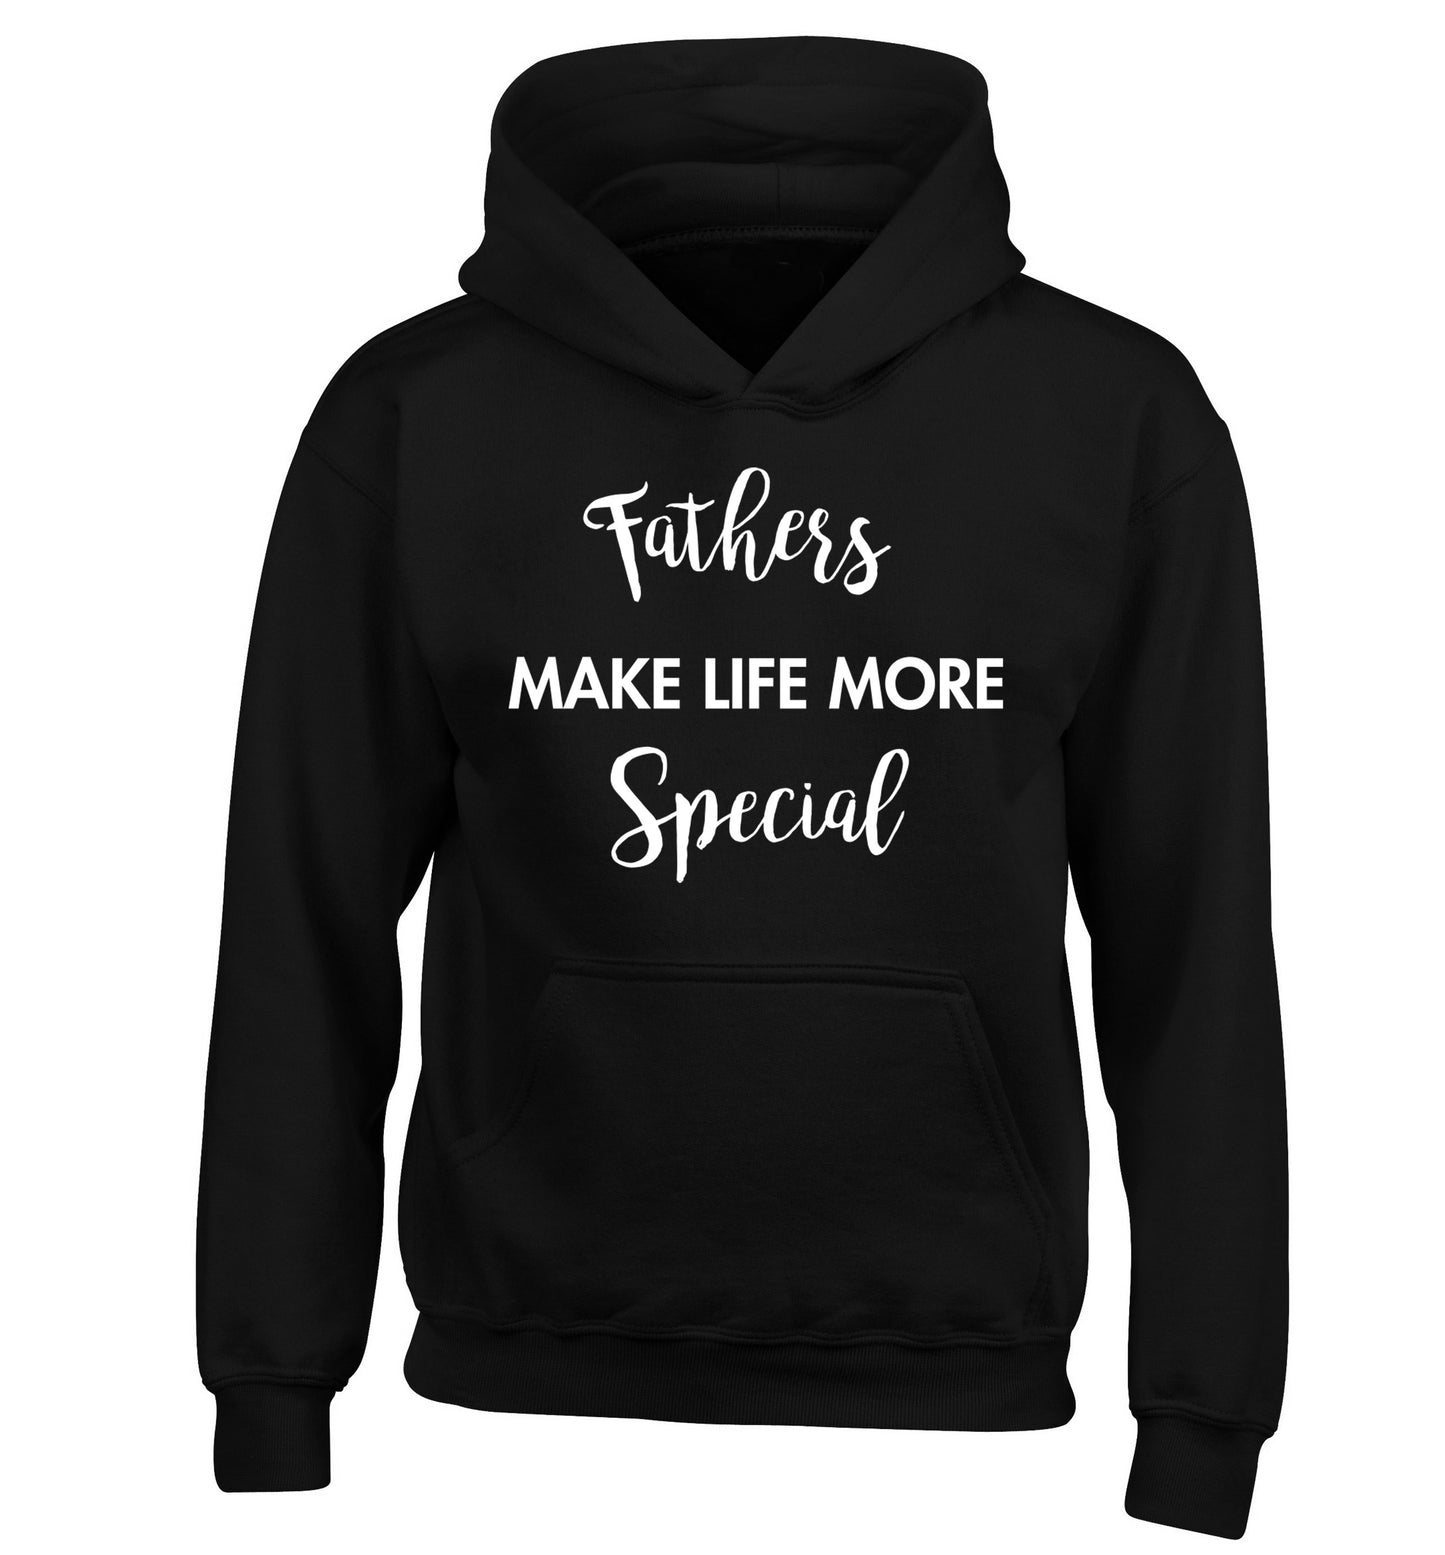 Fathers make life more special children's black hoodie 12-14 Years